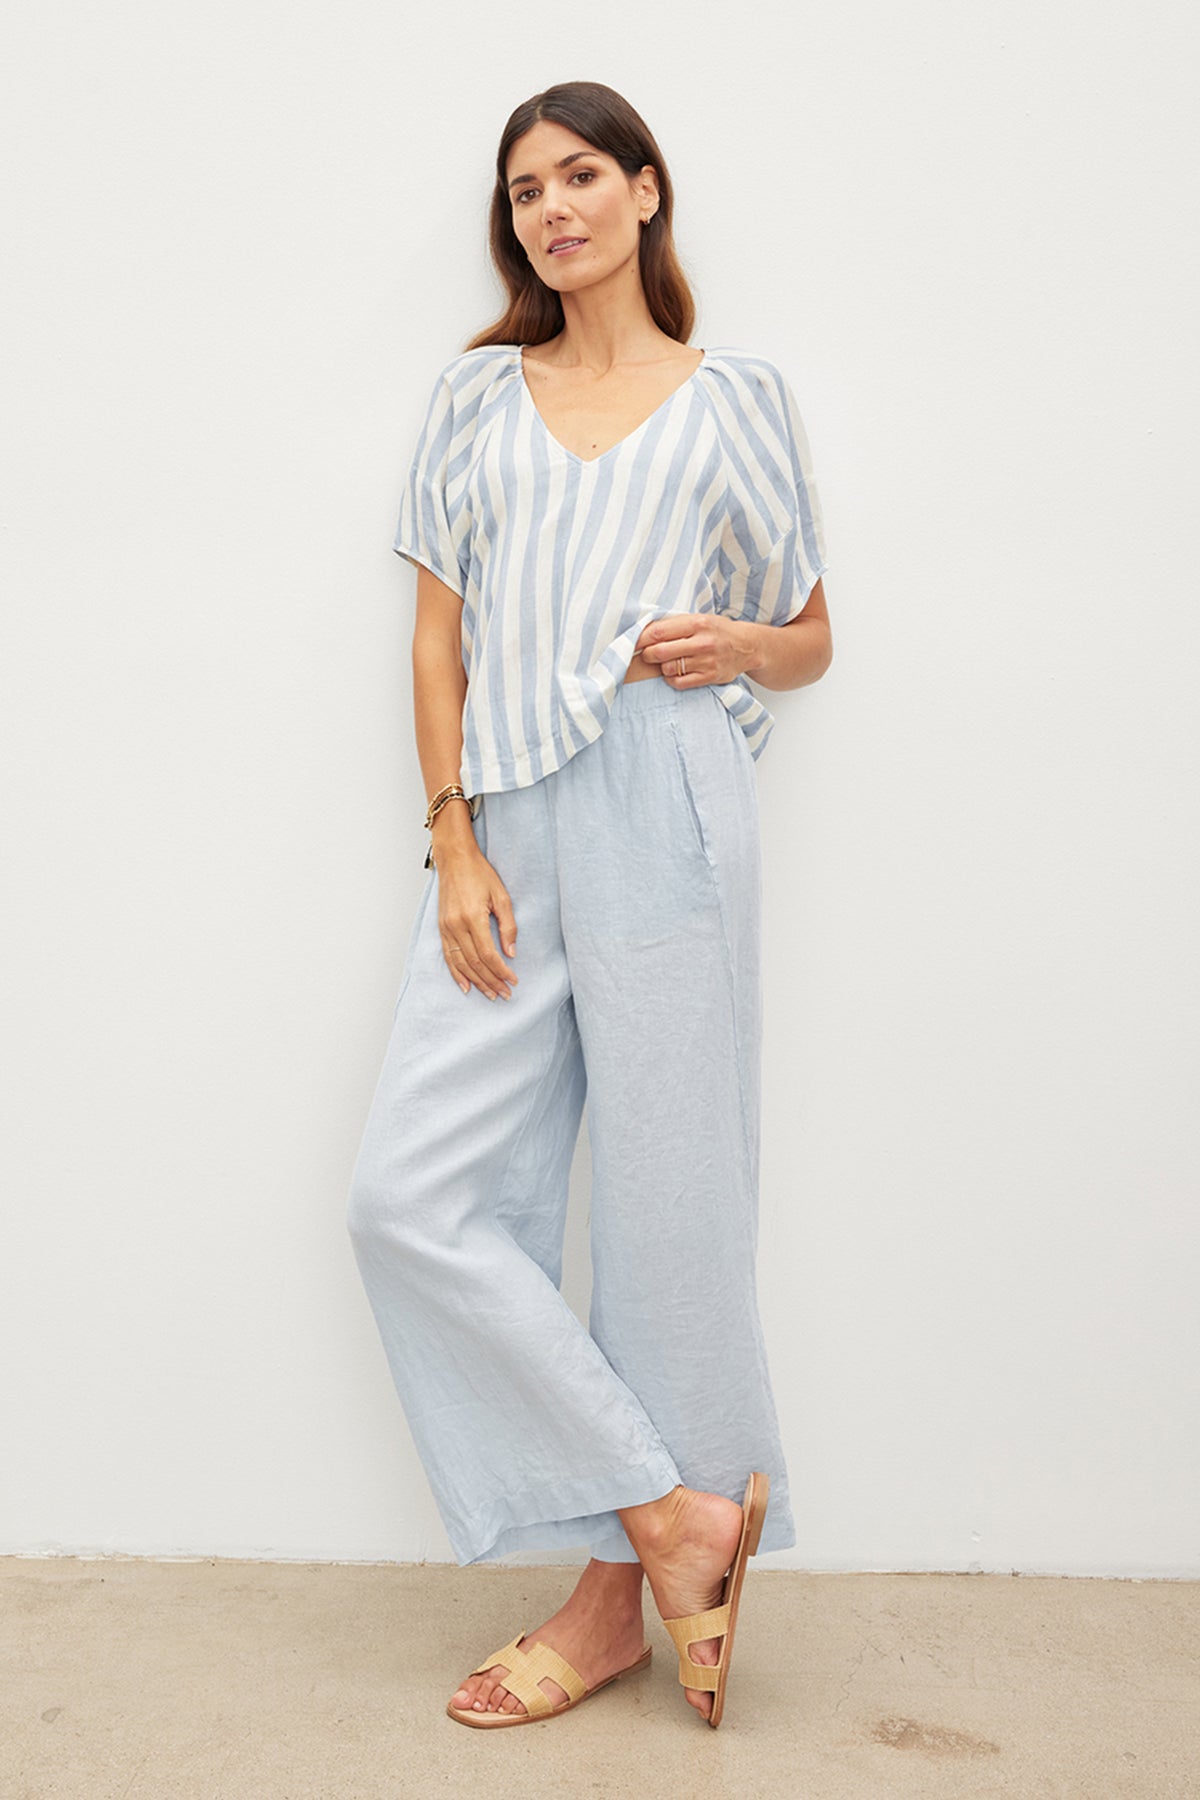 The model is wearing a lightweight linen woven striped top and Velvet by Graham & Spencer wide leg pants.-36002577481921